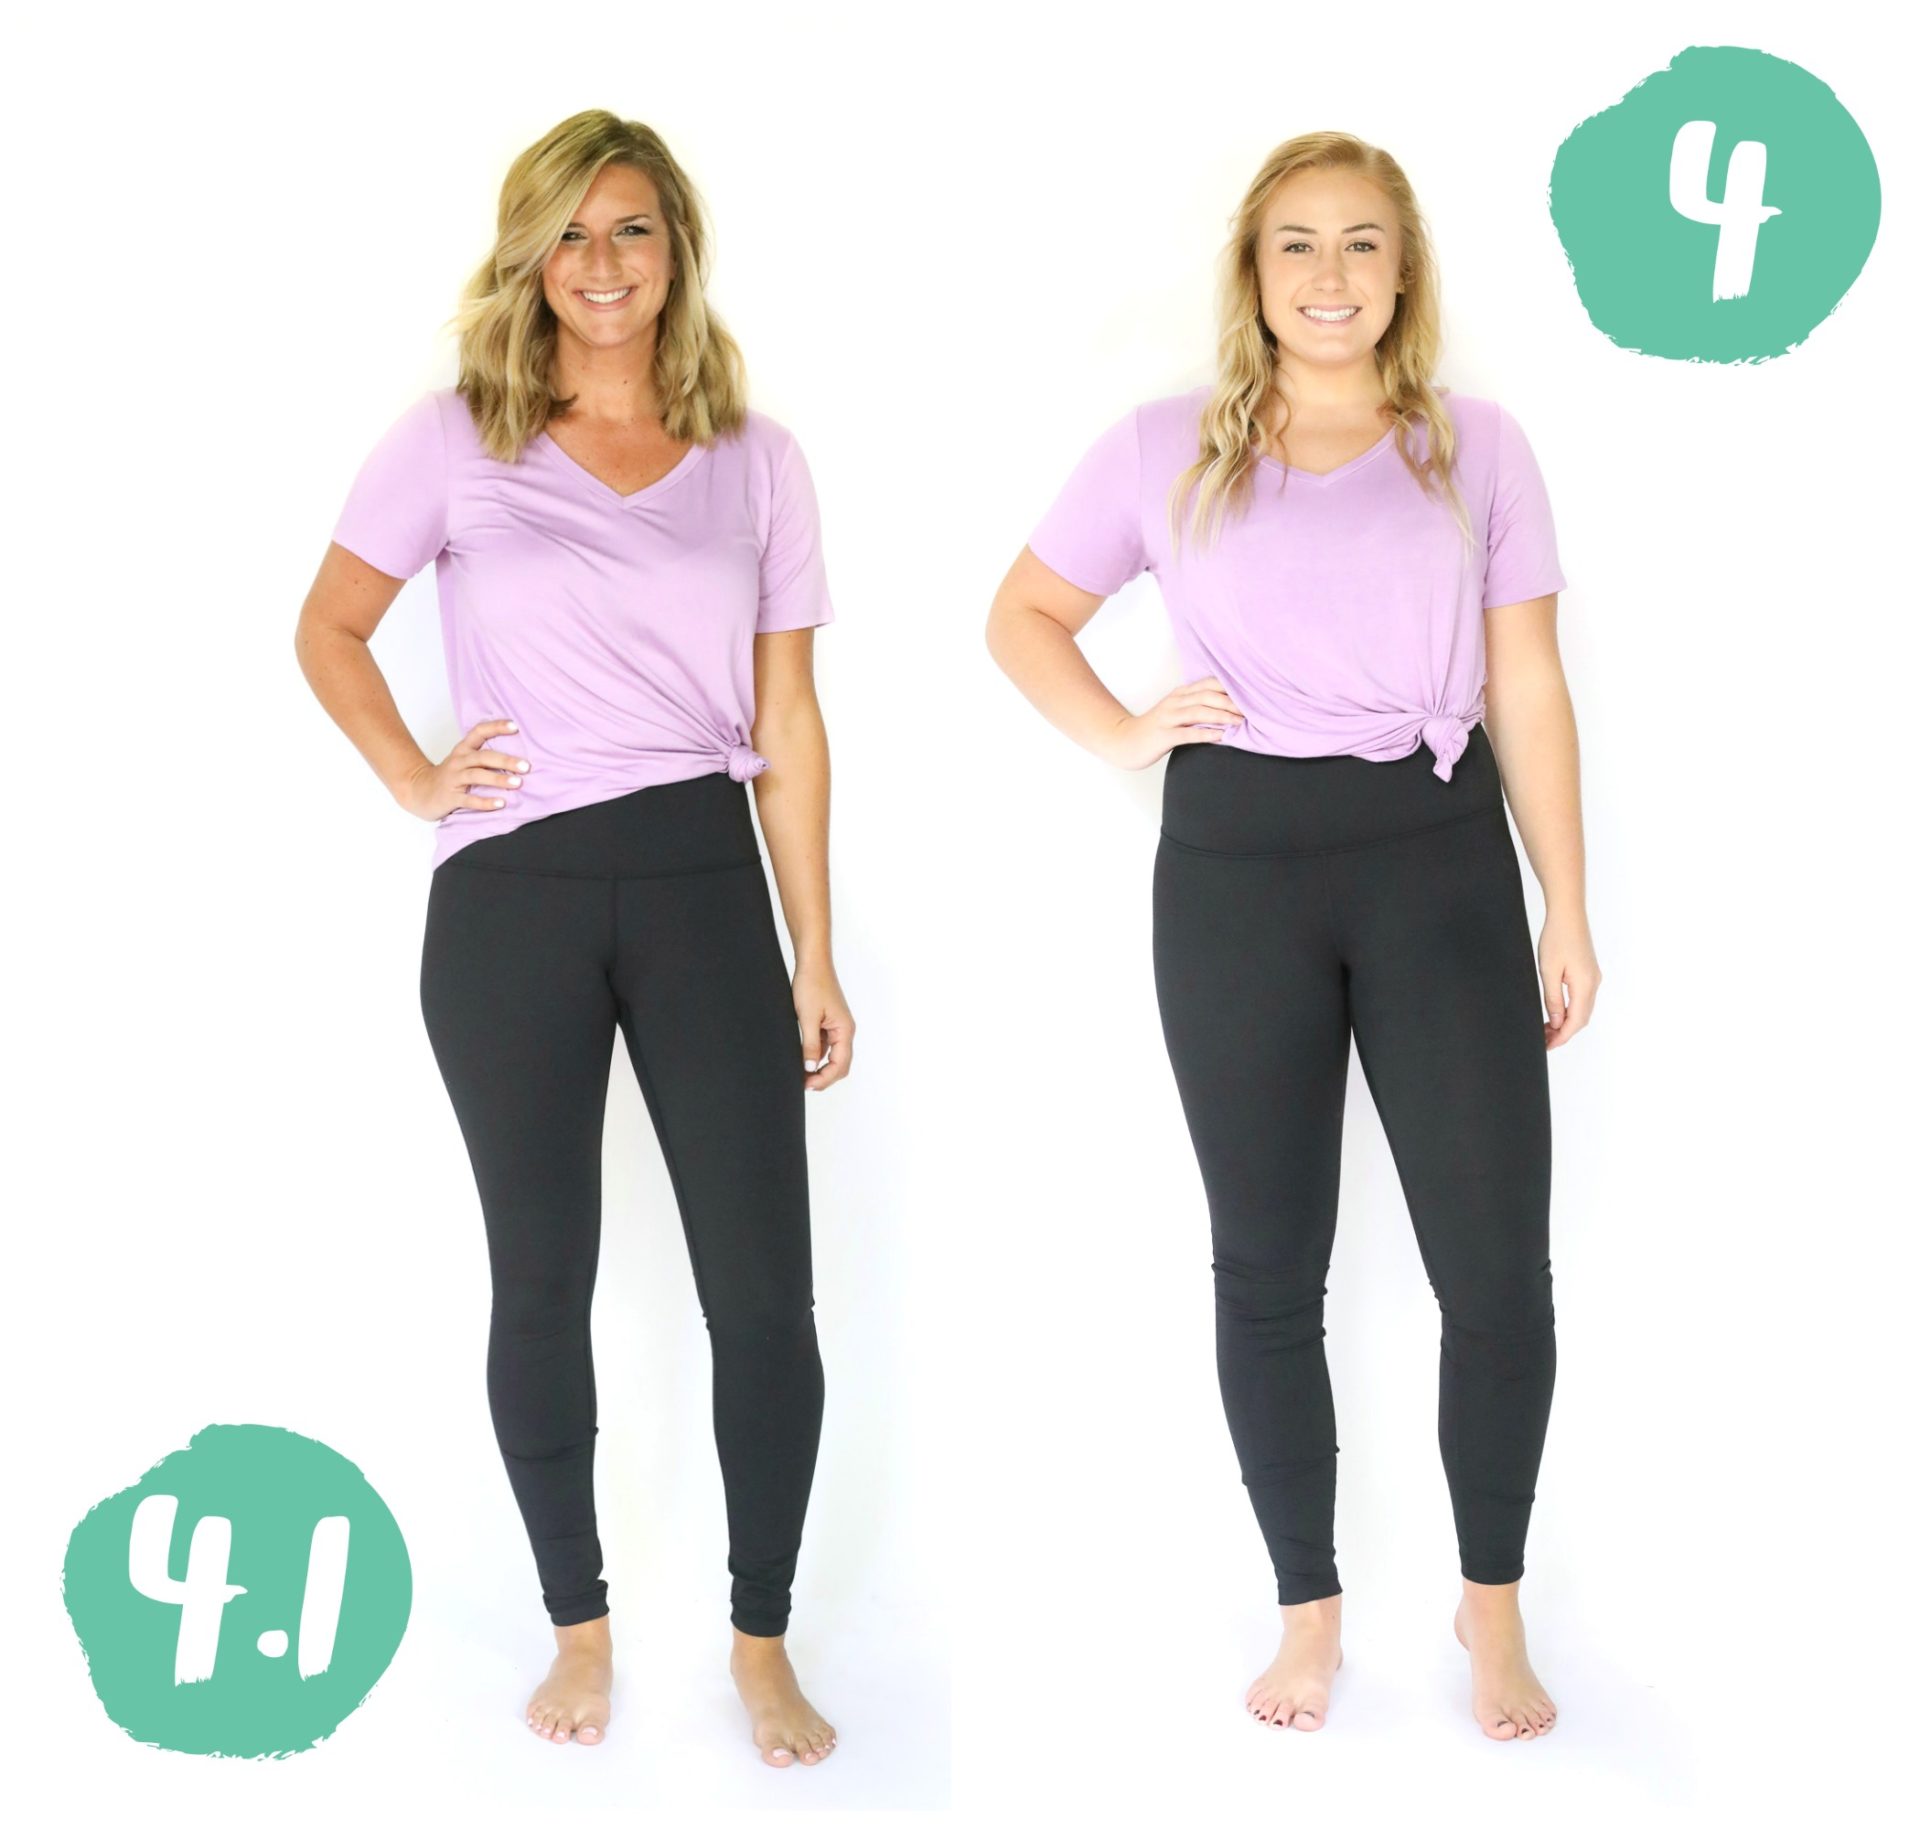 My Lululemon Collection: Includes Review and Comparison to Zella